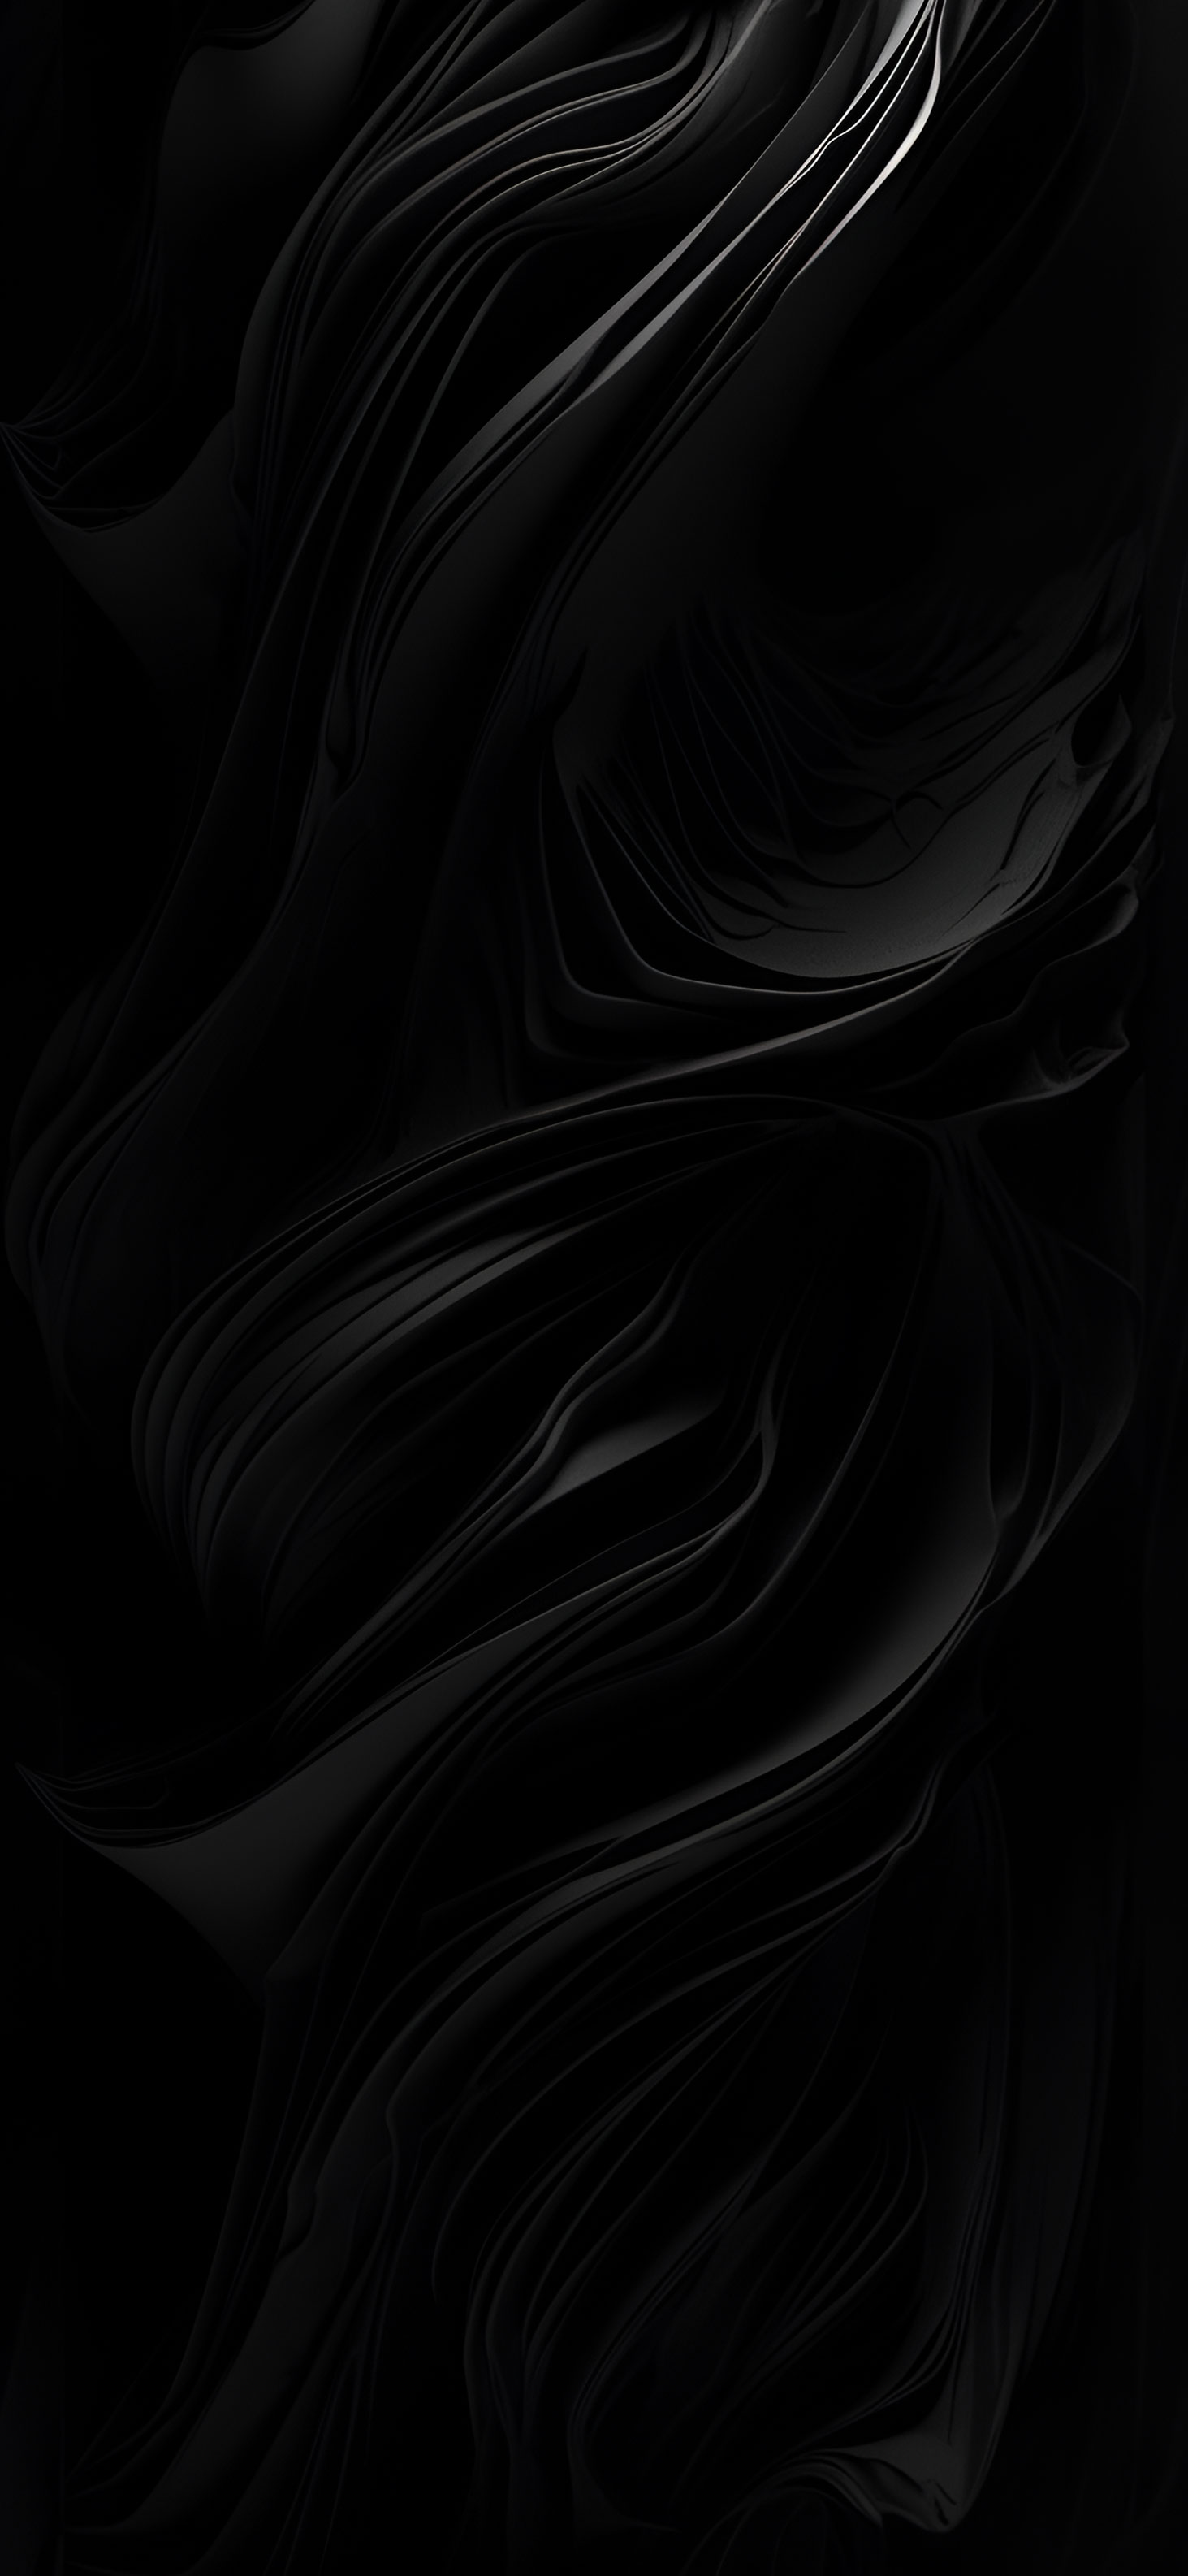 Smooth abstract wallpaper Royalty Free Vector Image-sgquangbinhtourist.com.vn